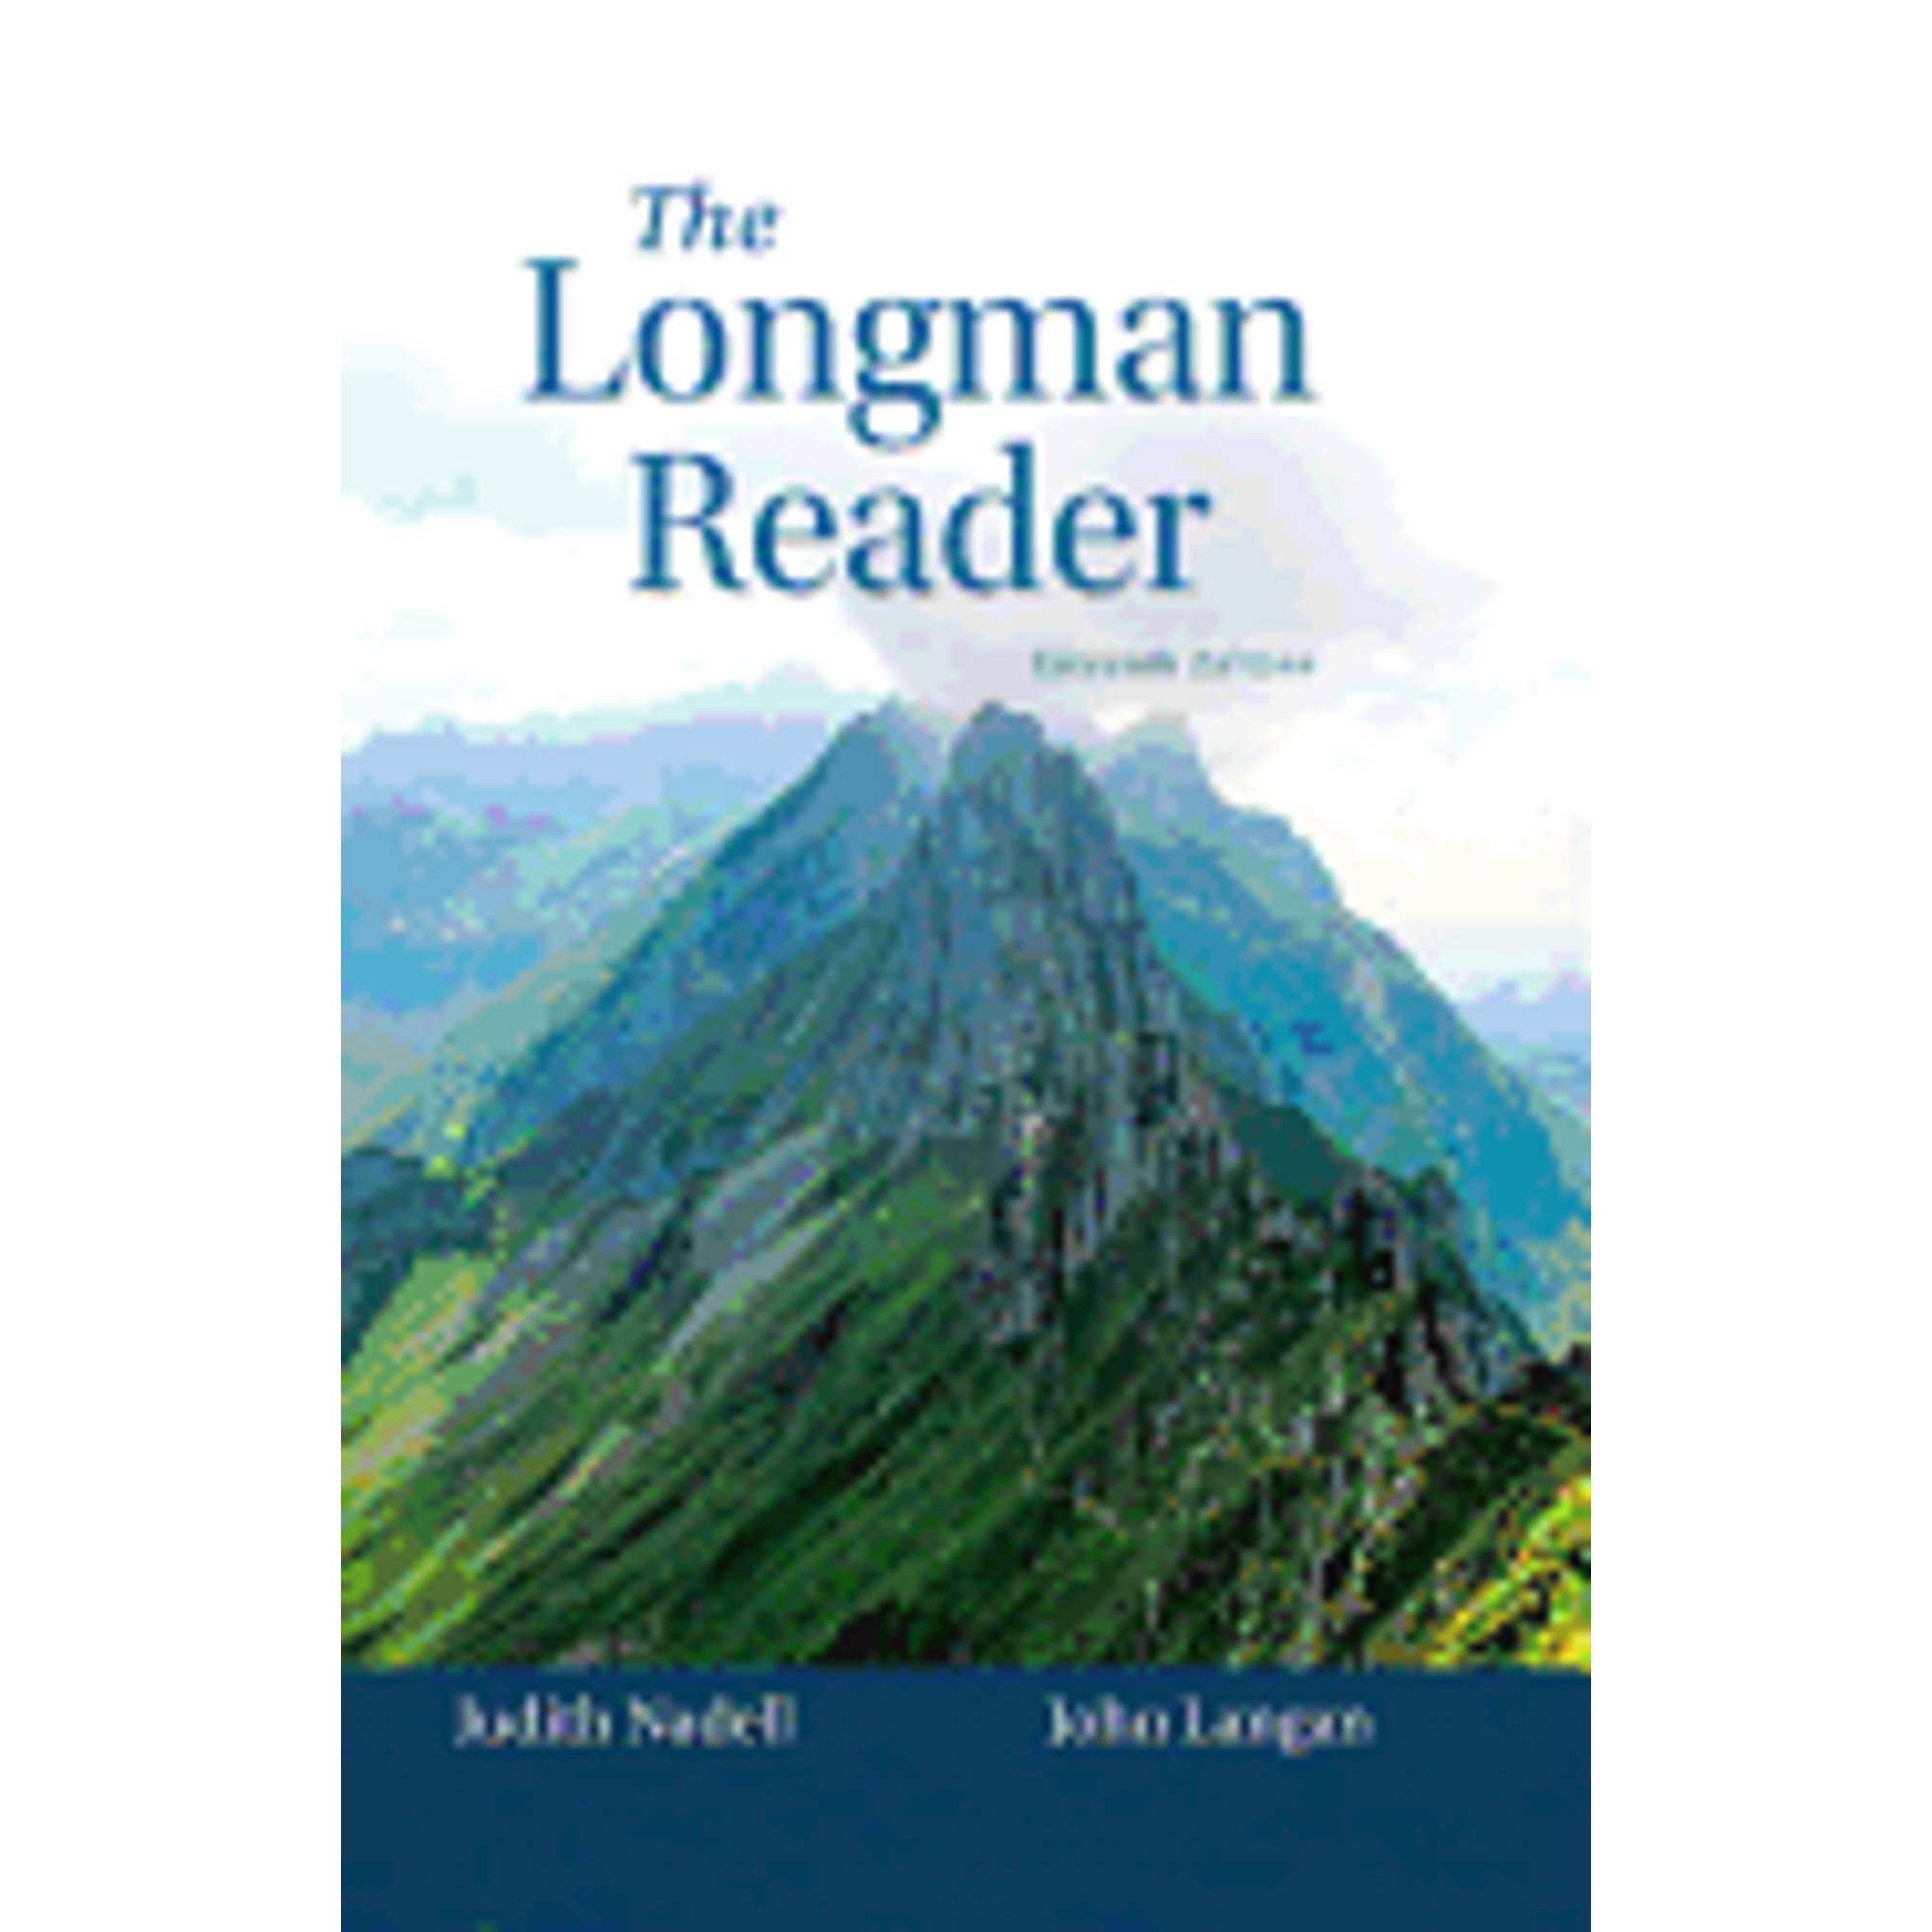 The Longman Reader (Edition 11) (Paperback) - image 1 of 1